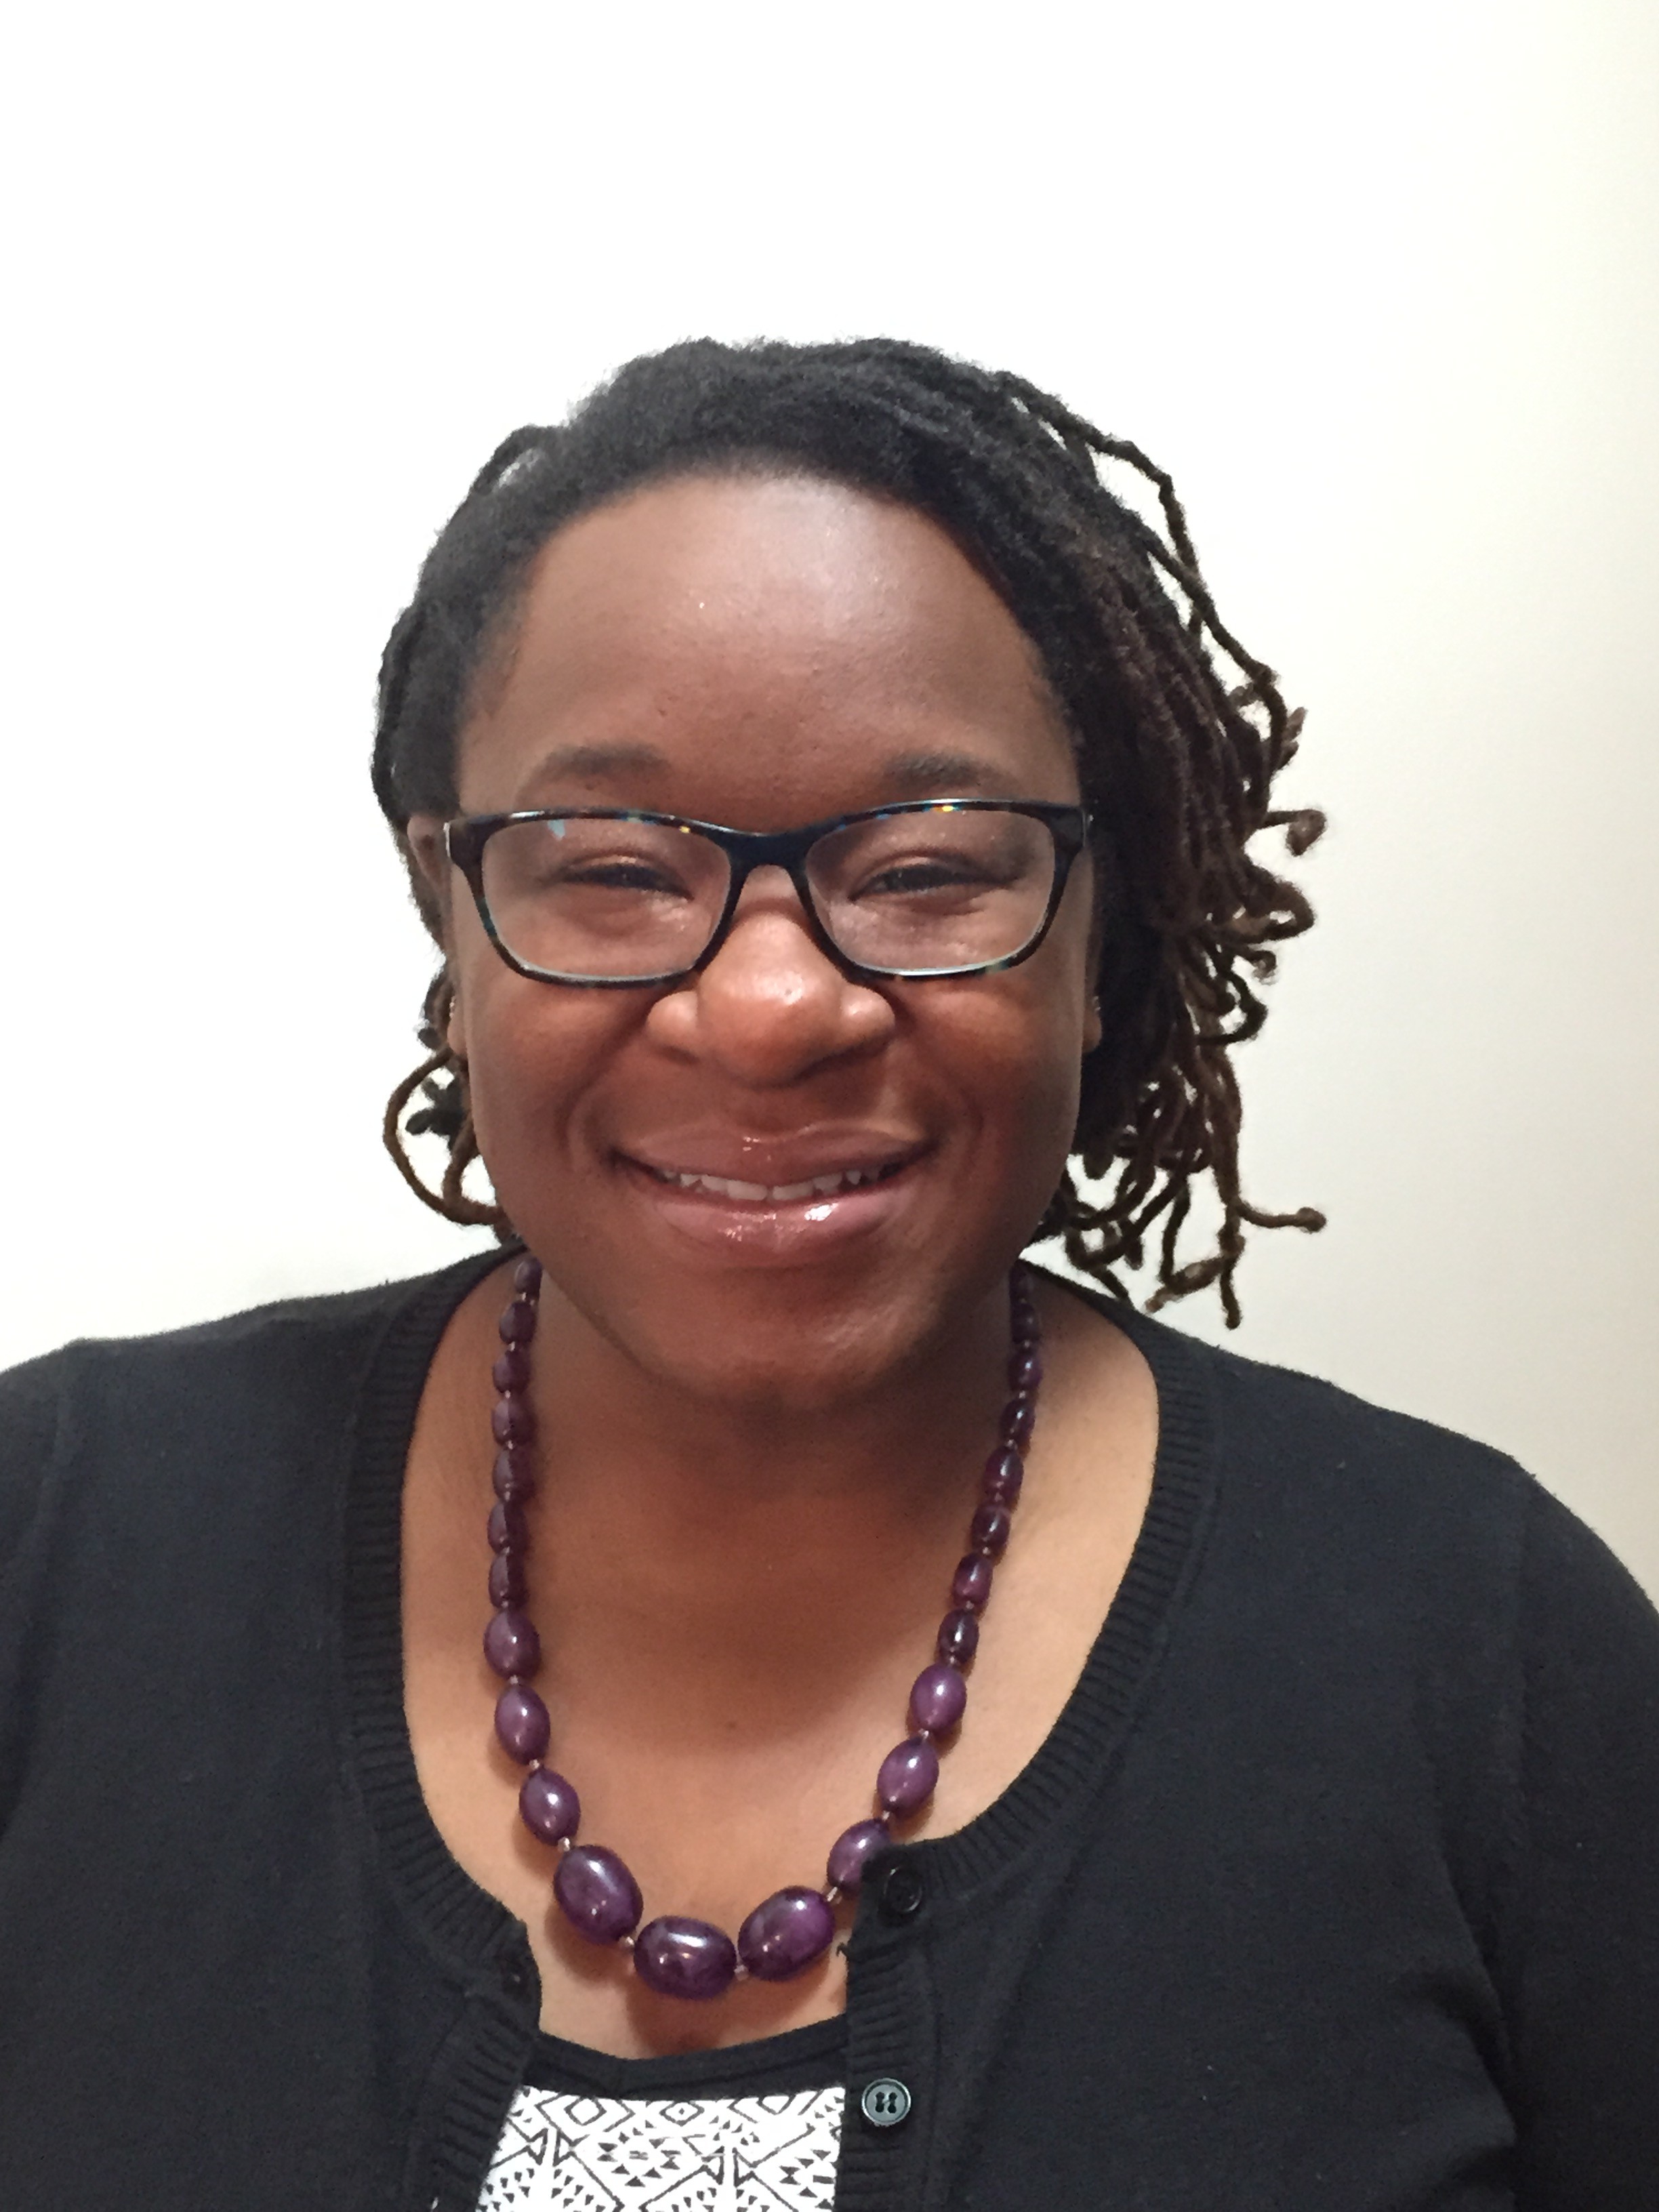 Meet Tiffany McAfee, Matchbook Learning’s new Director of Personalized Learning at Merit Prep!